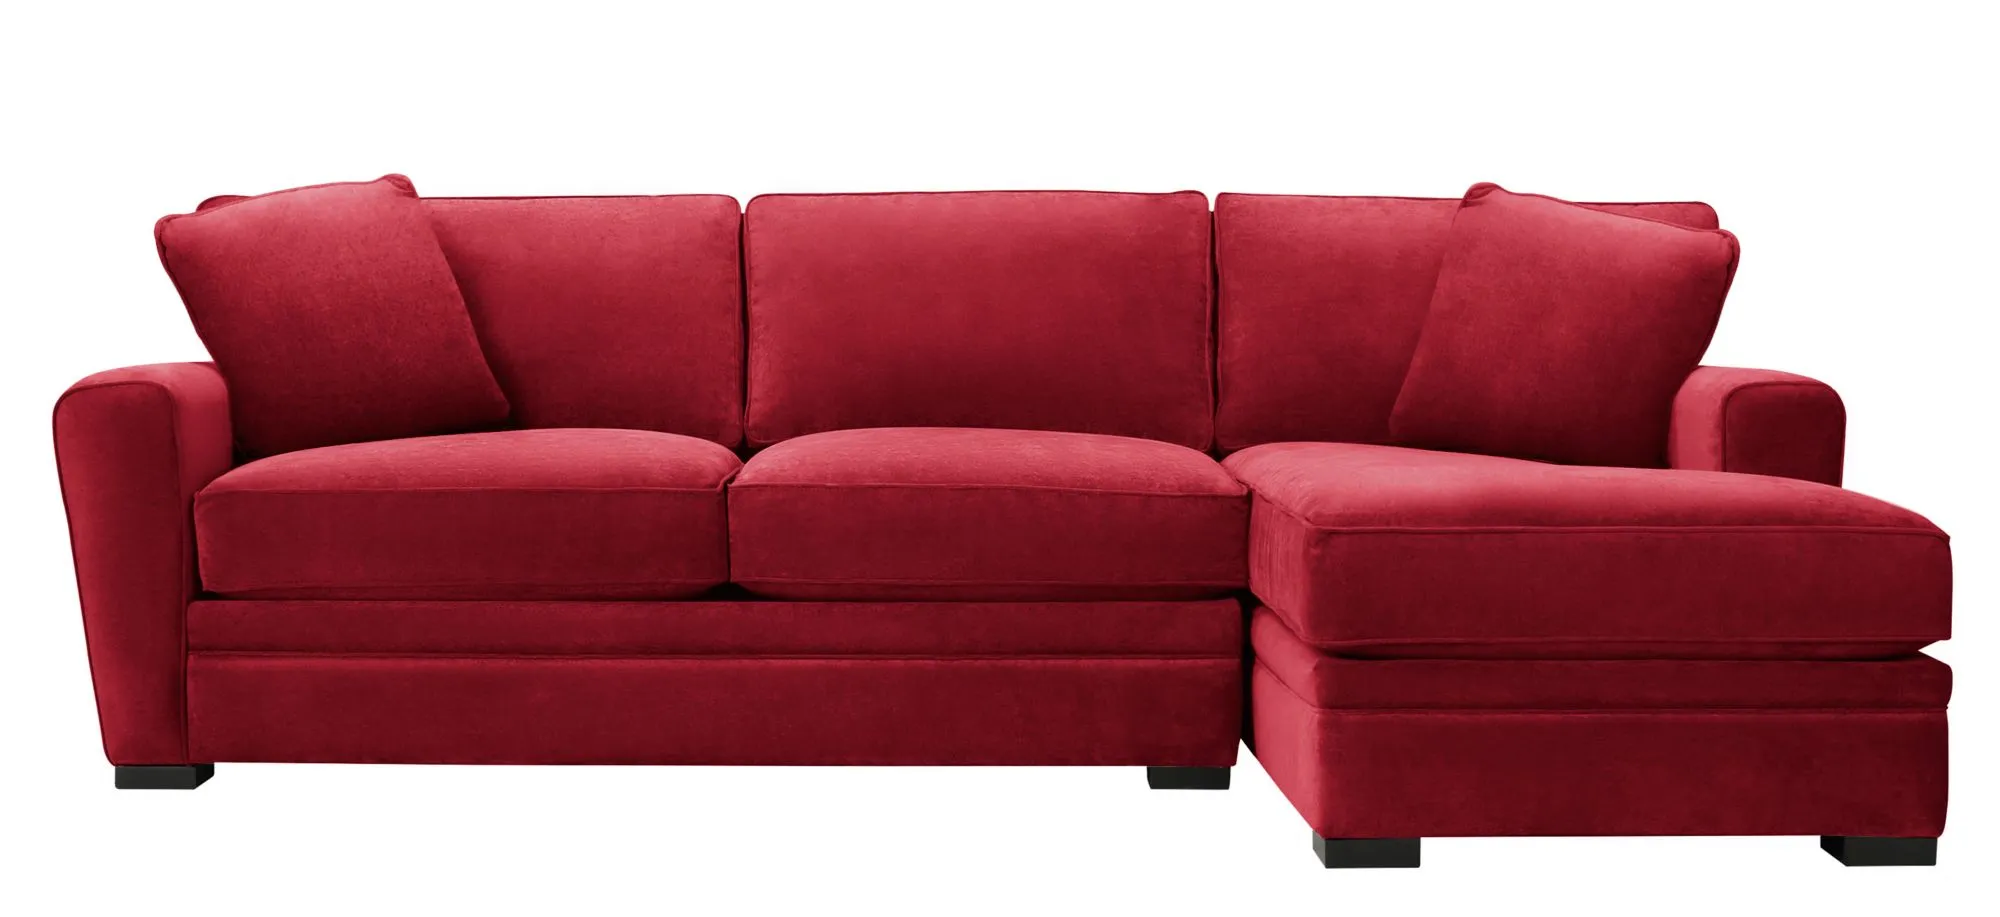 Artemis II 2-pc. Right Hand Facing Sectional Sofa in Gypsy Scarlet by Jonathan Louis